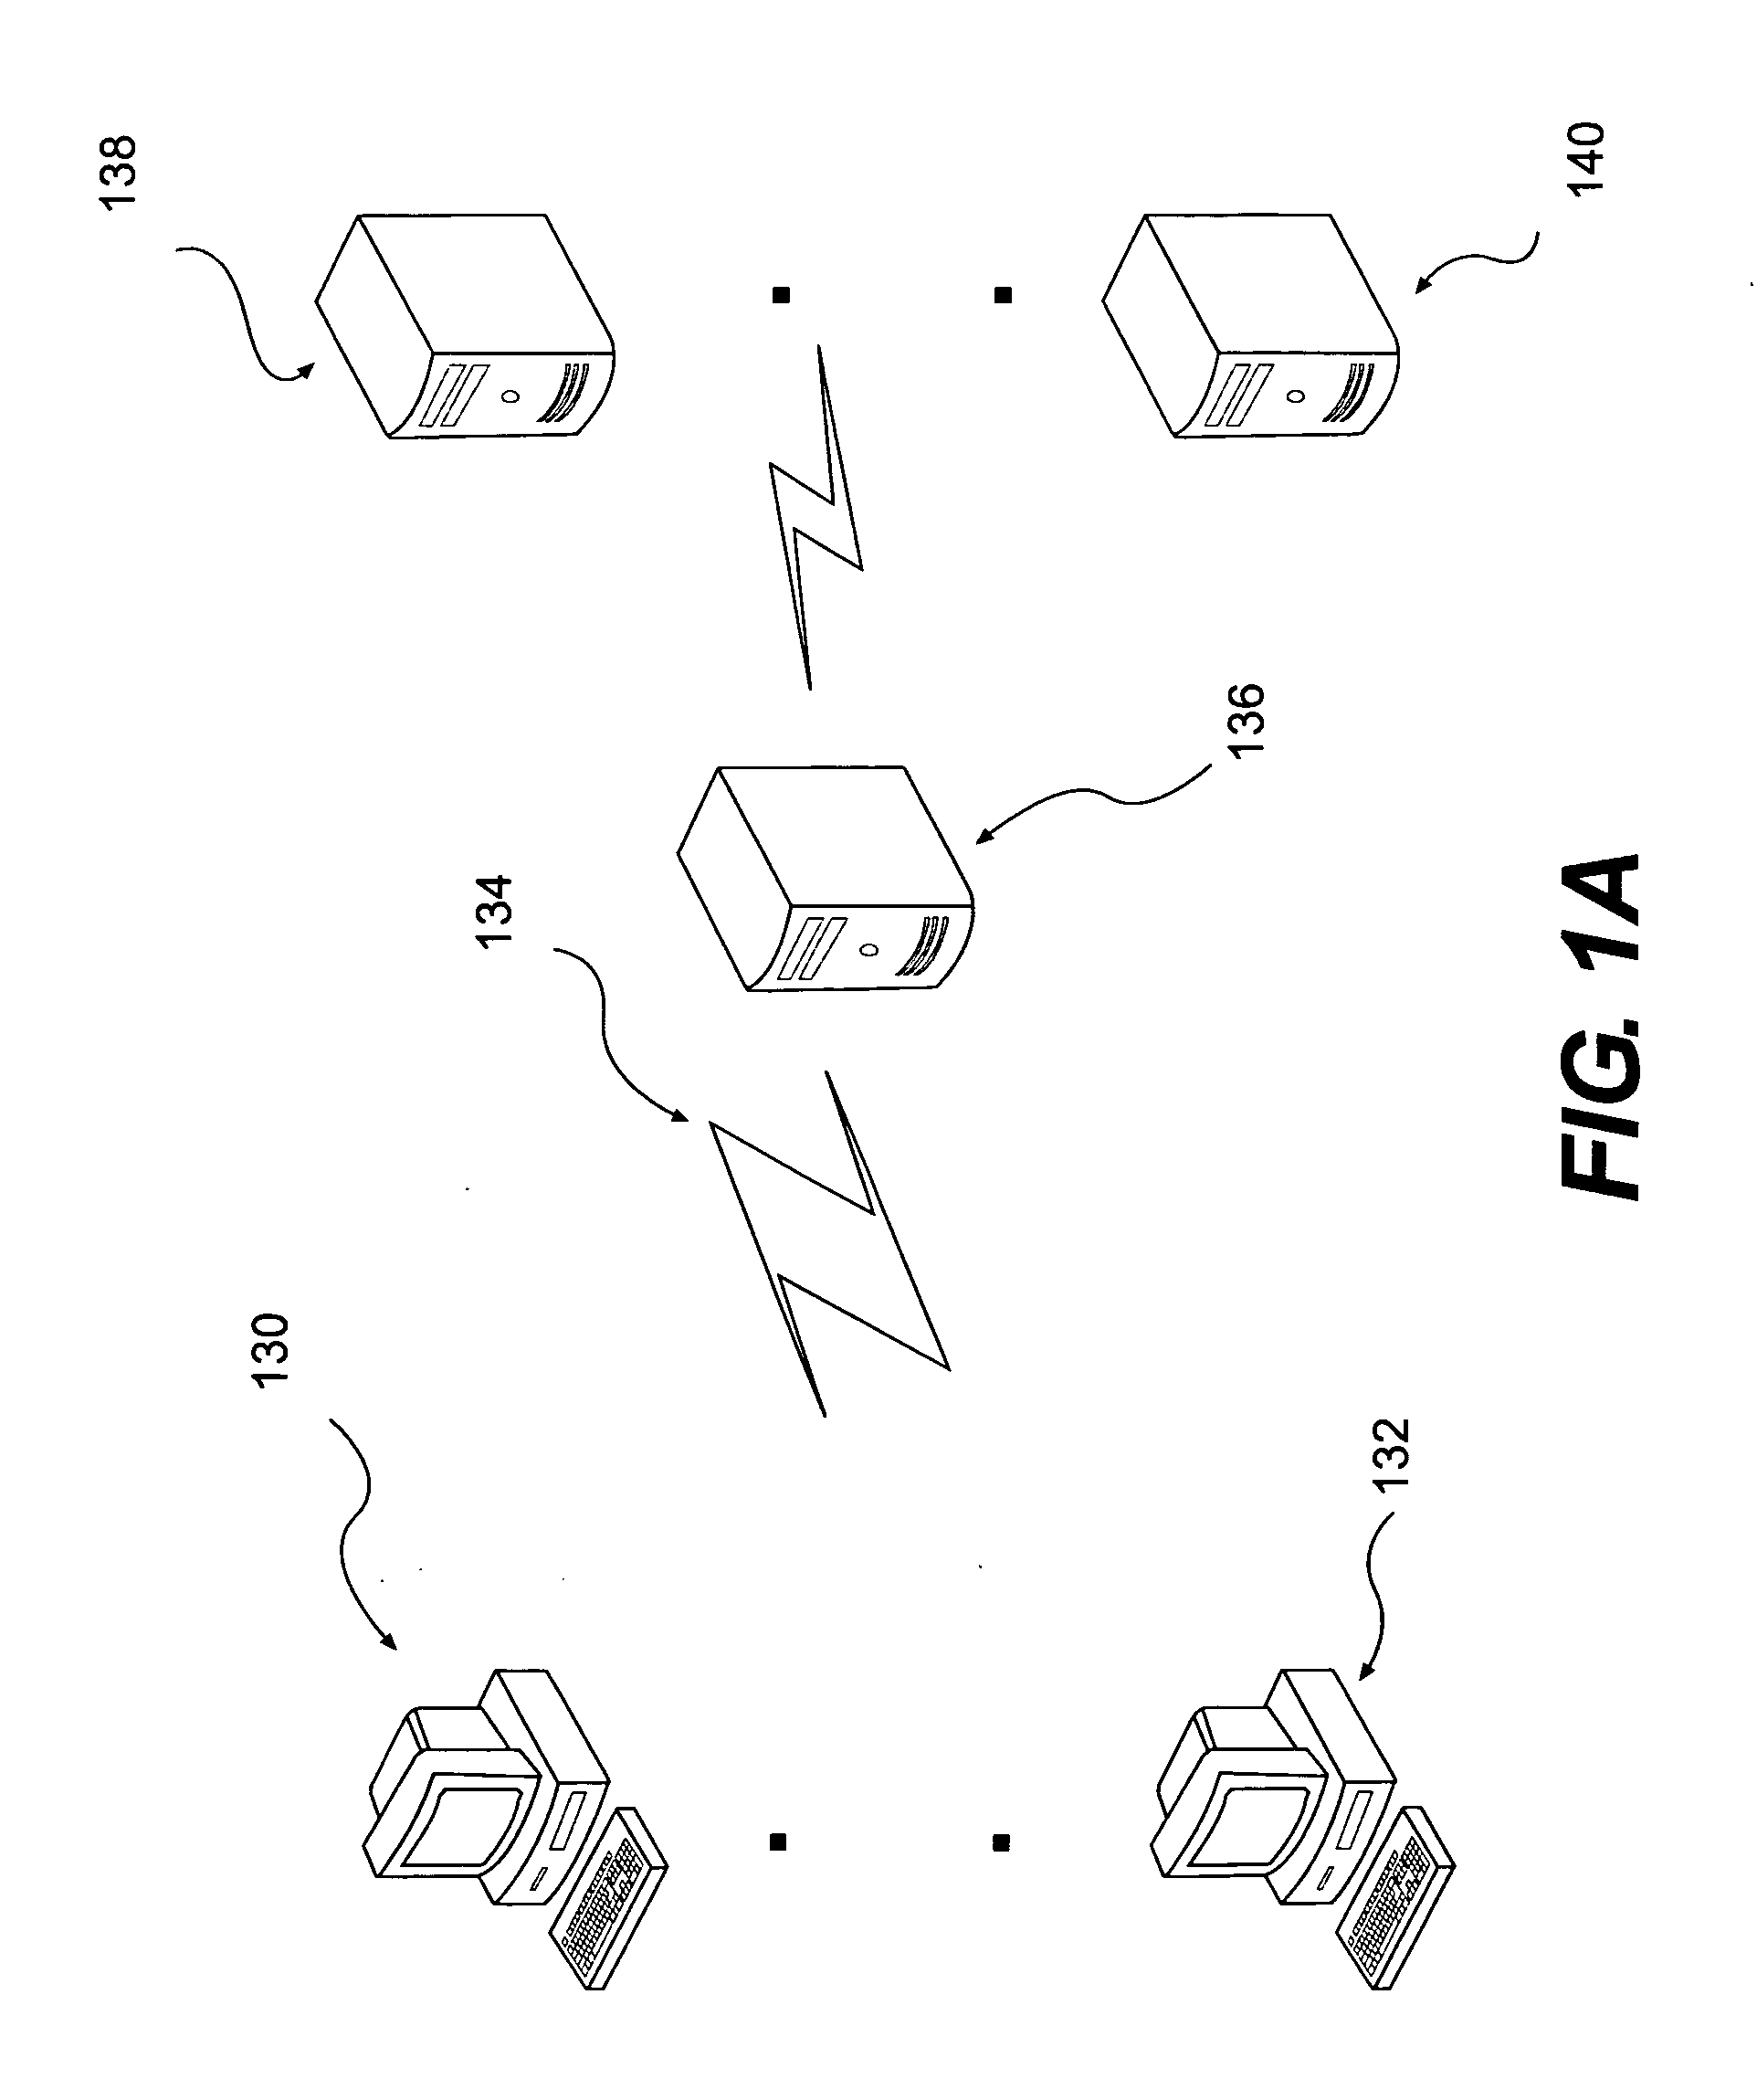 Systems and methods for automatic generation of information